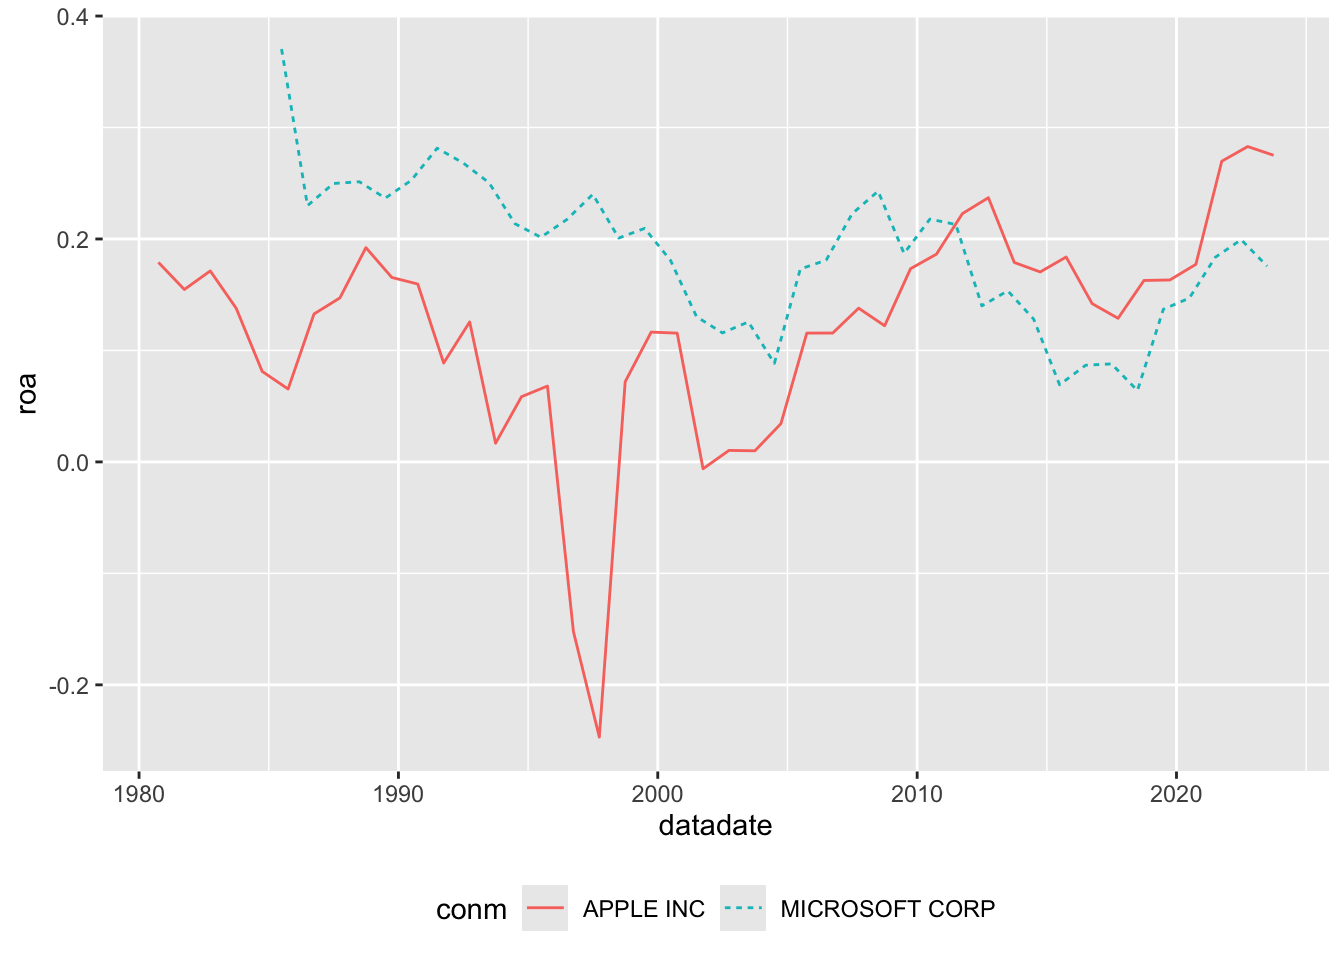 Plot of ROA over time for Microsoft and Apple